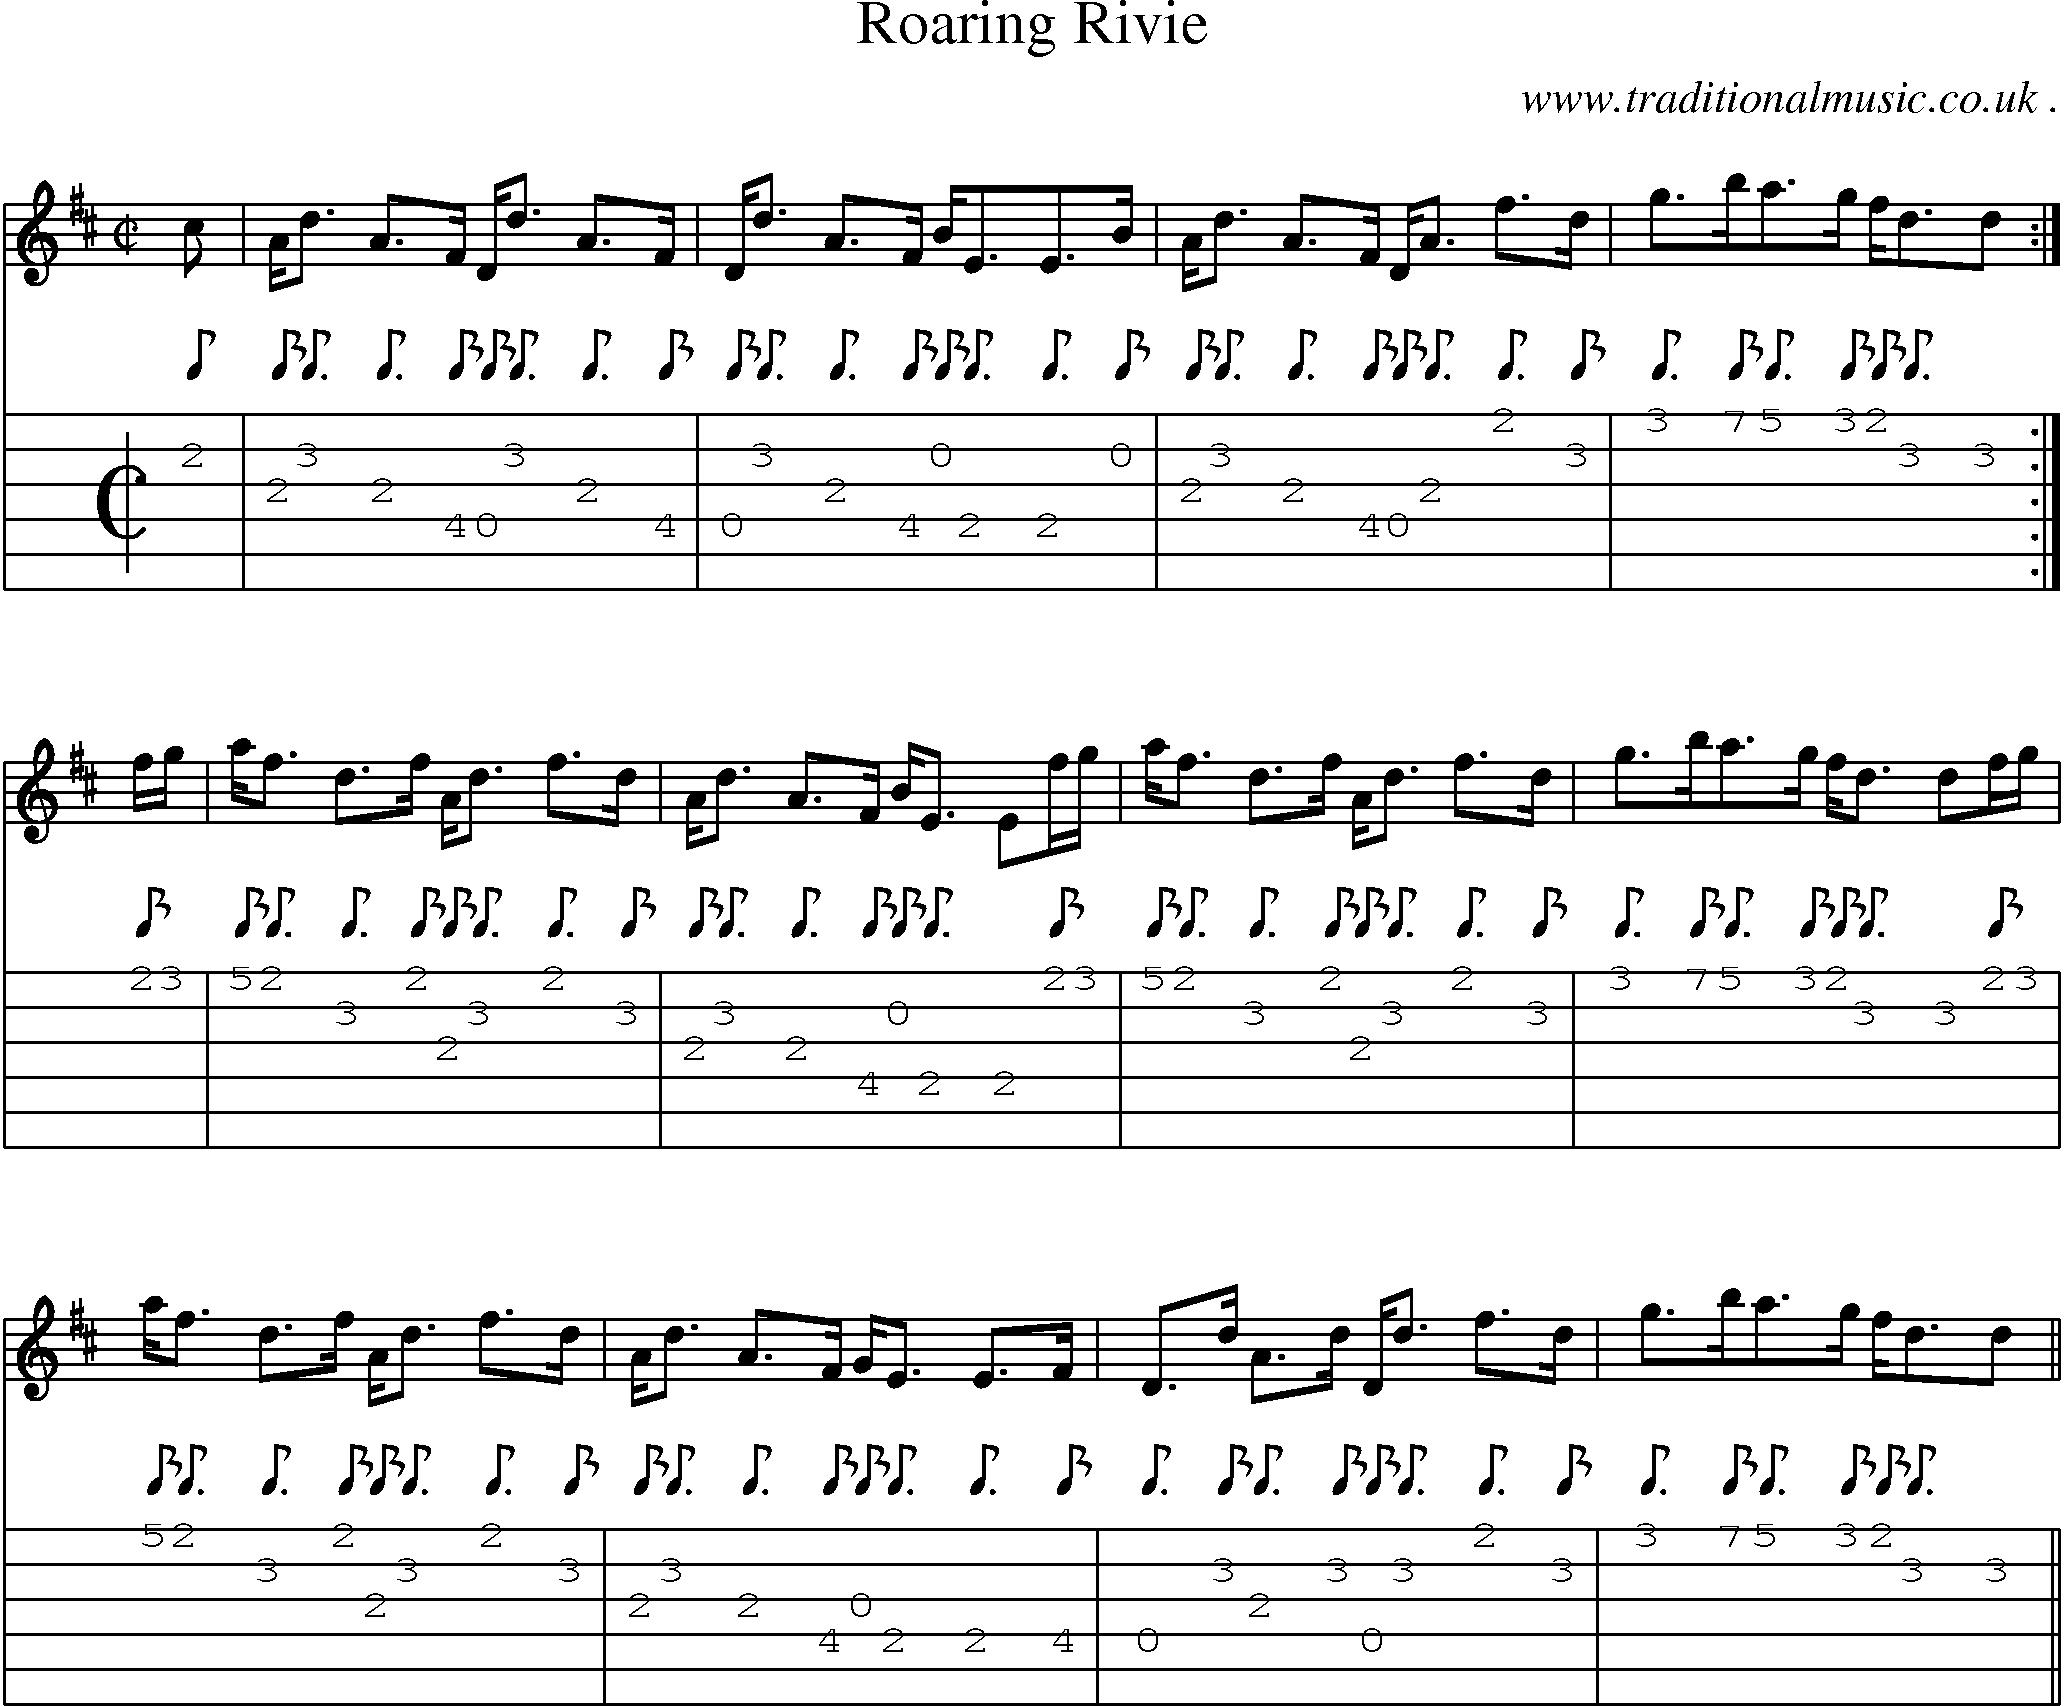 Sheet-music  score, Chords and Guitar Tabs for Roaring Rivie